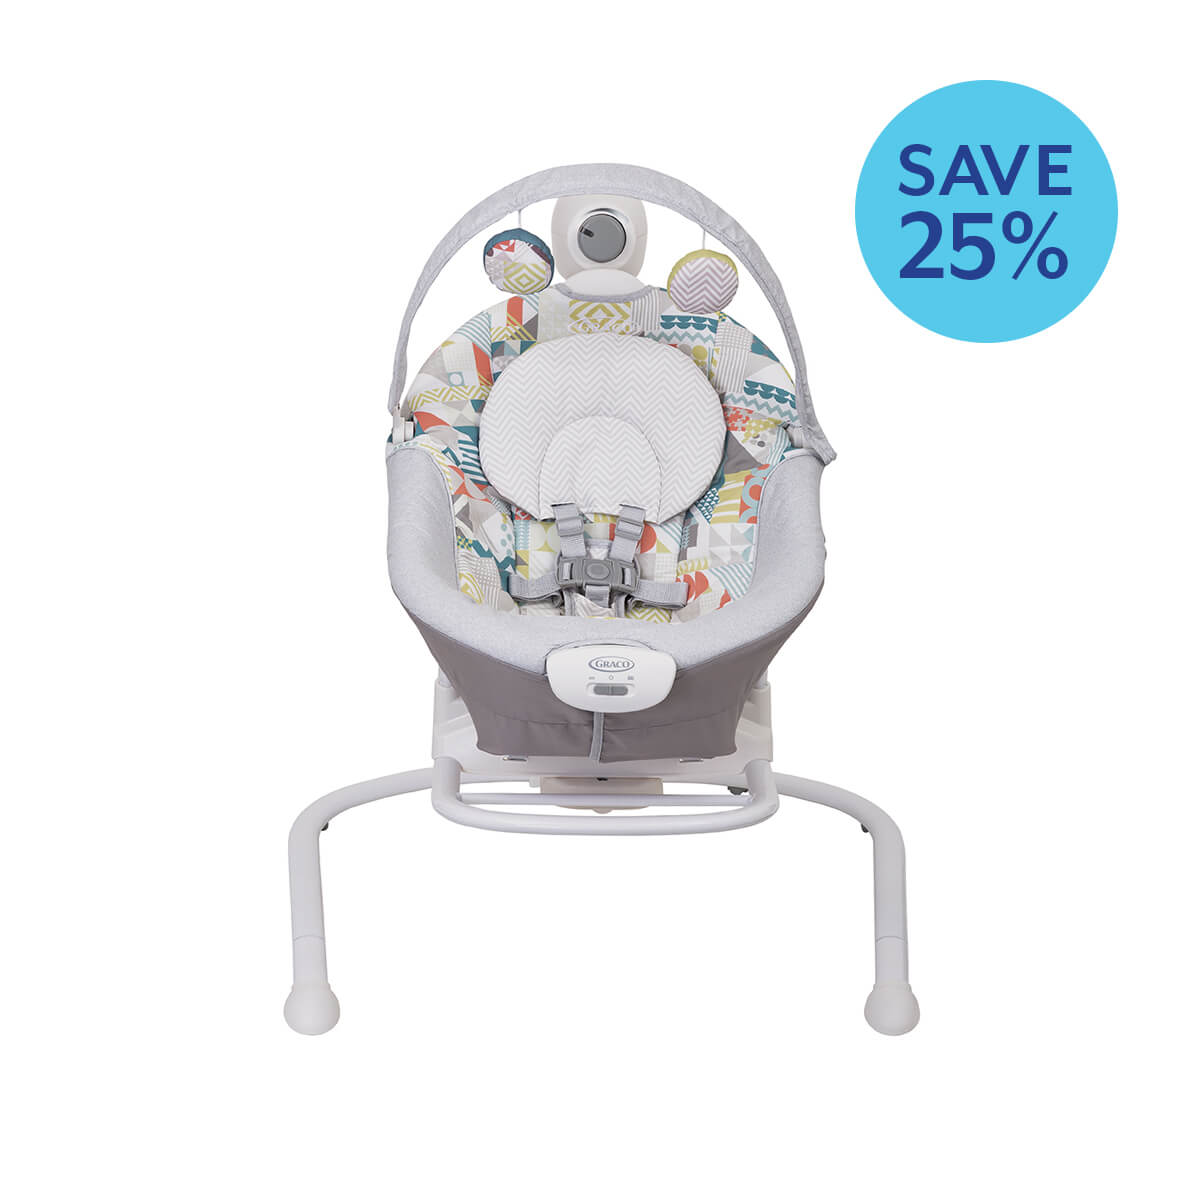 Graco Duet Sway™ front angle with Save 25%